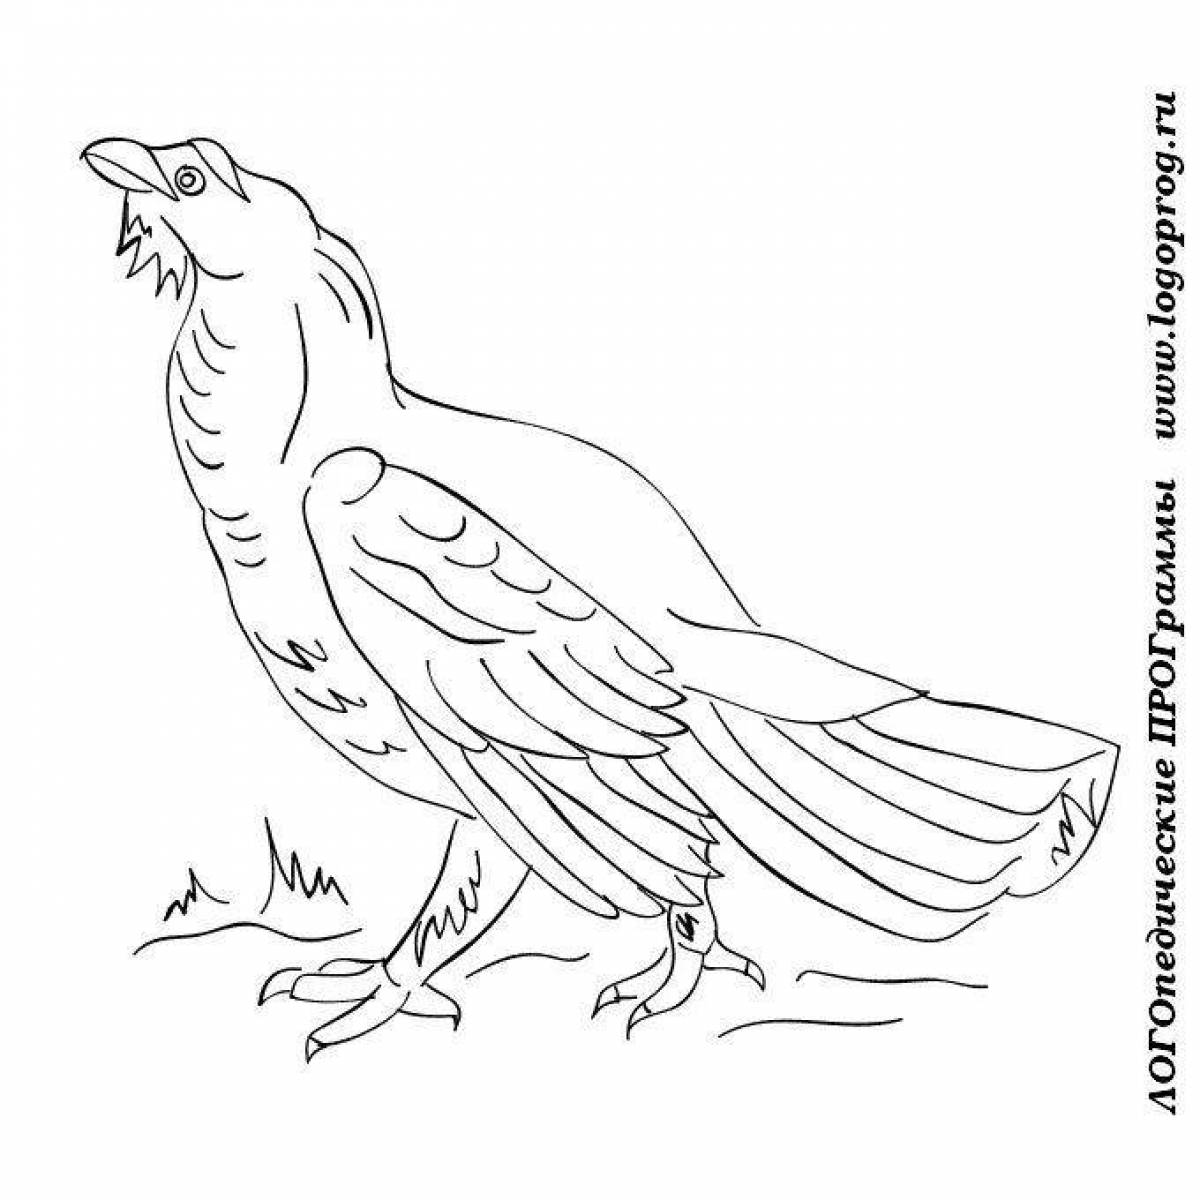 Delightful capercaillie coloring book for kids